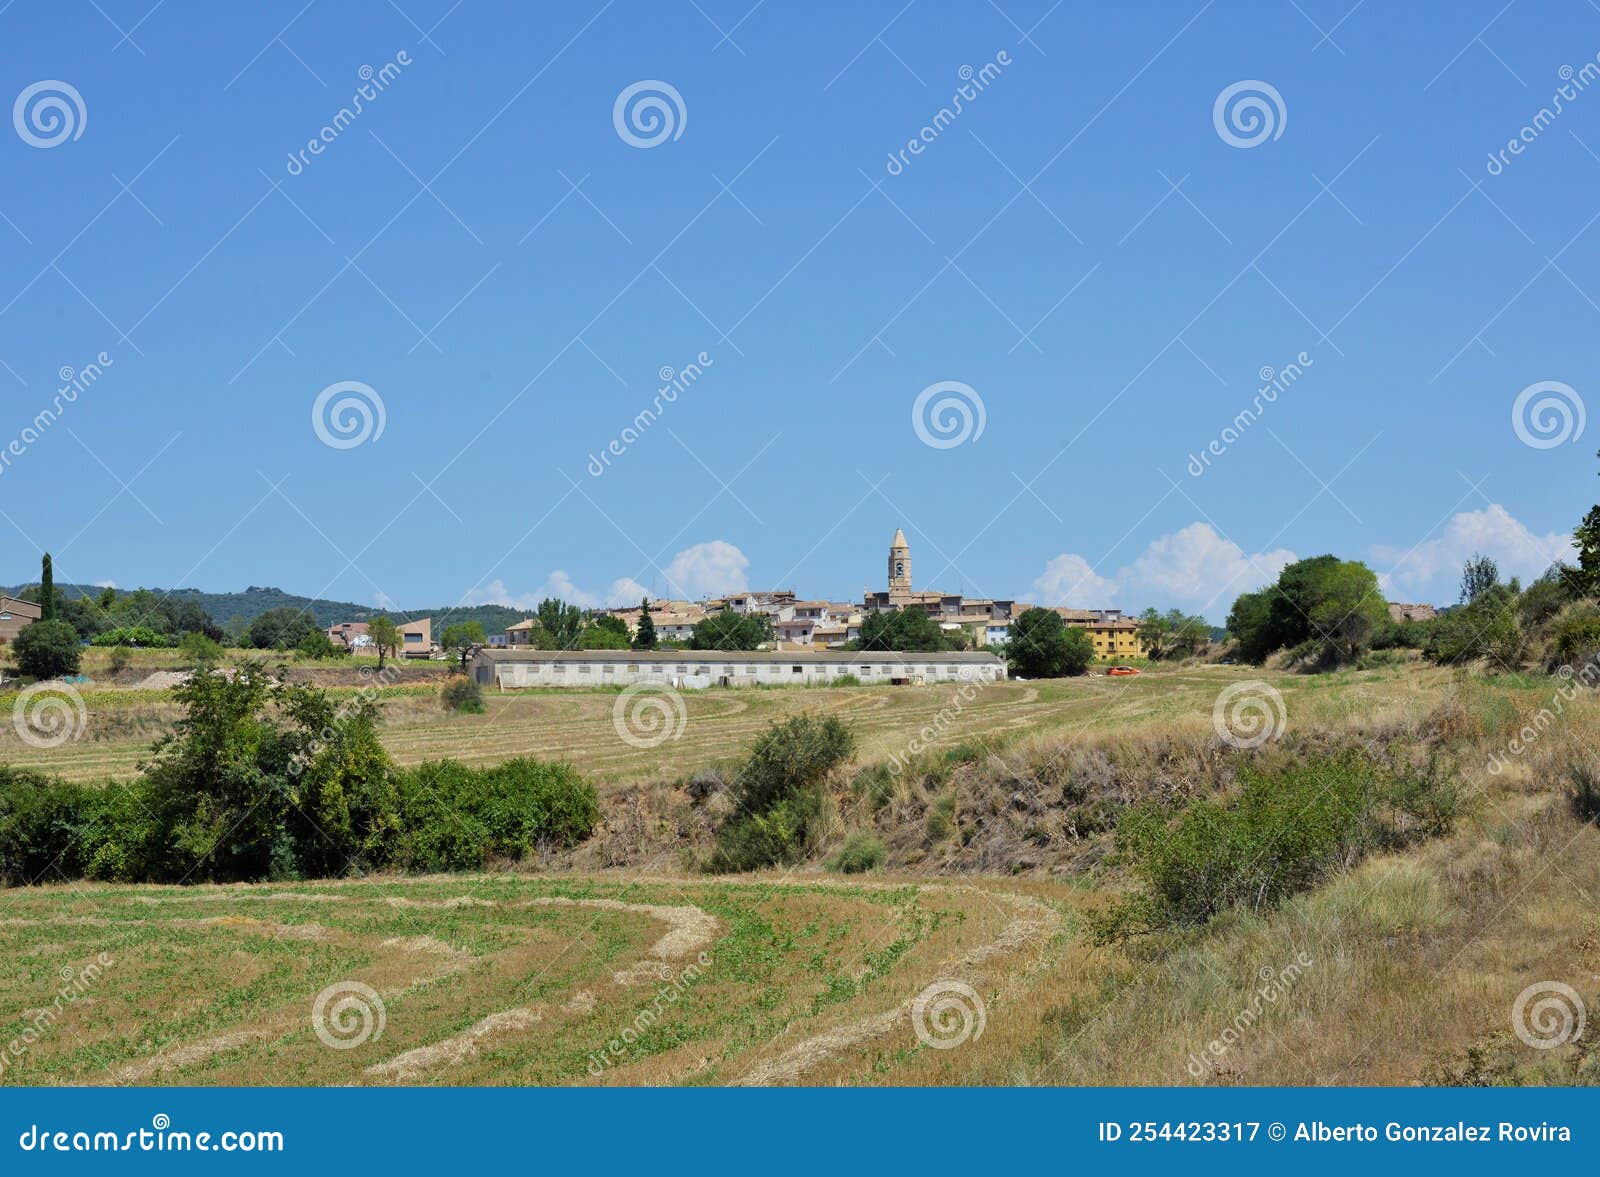 panoramic of the town of tolva province of huesca, aragon, spain